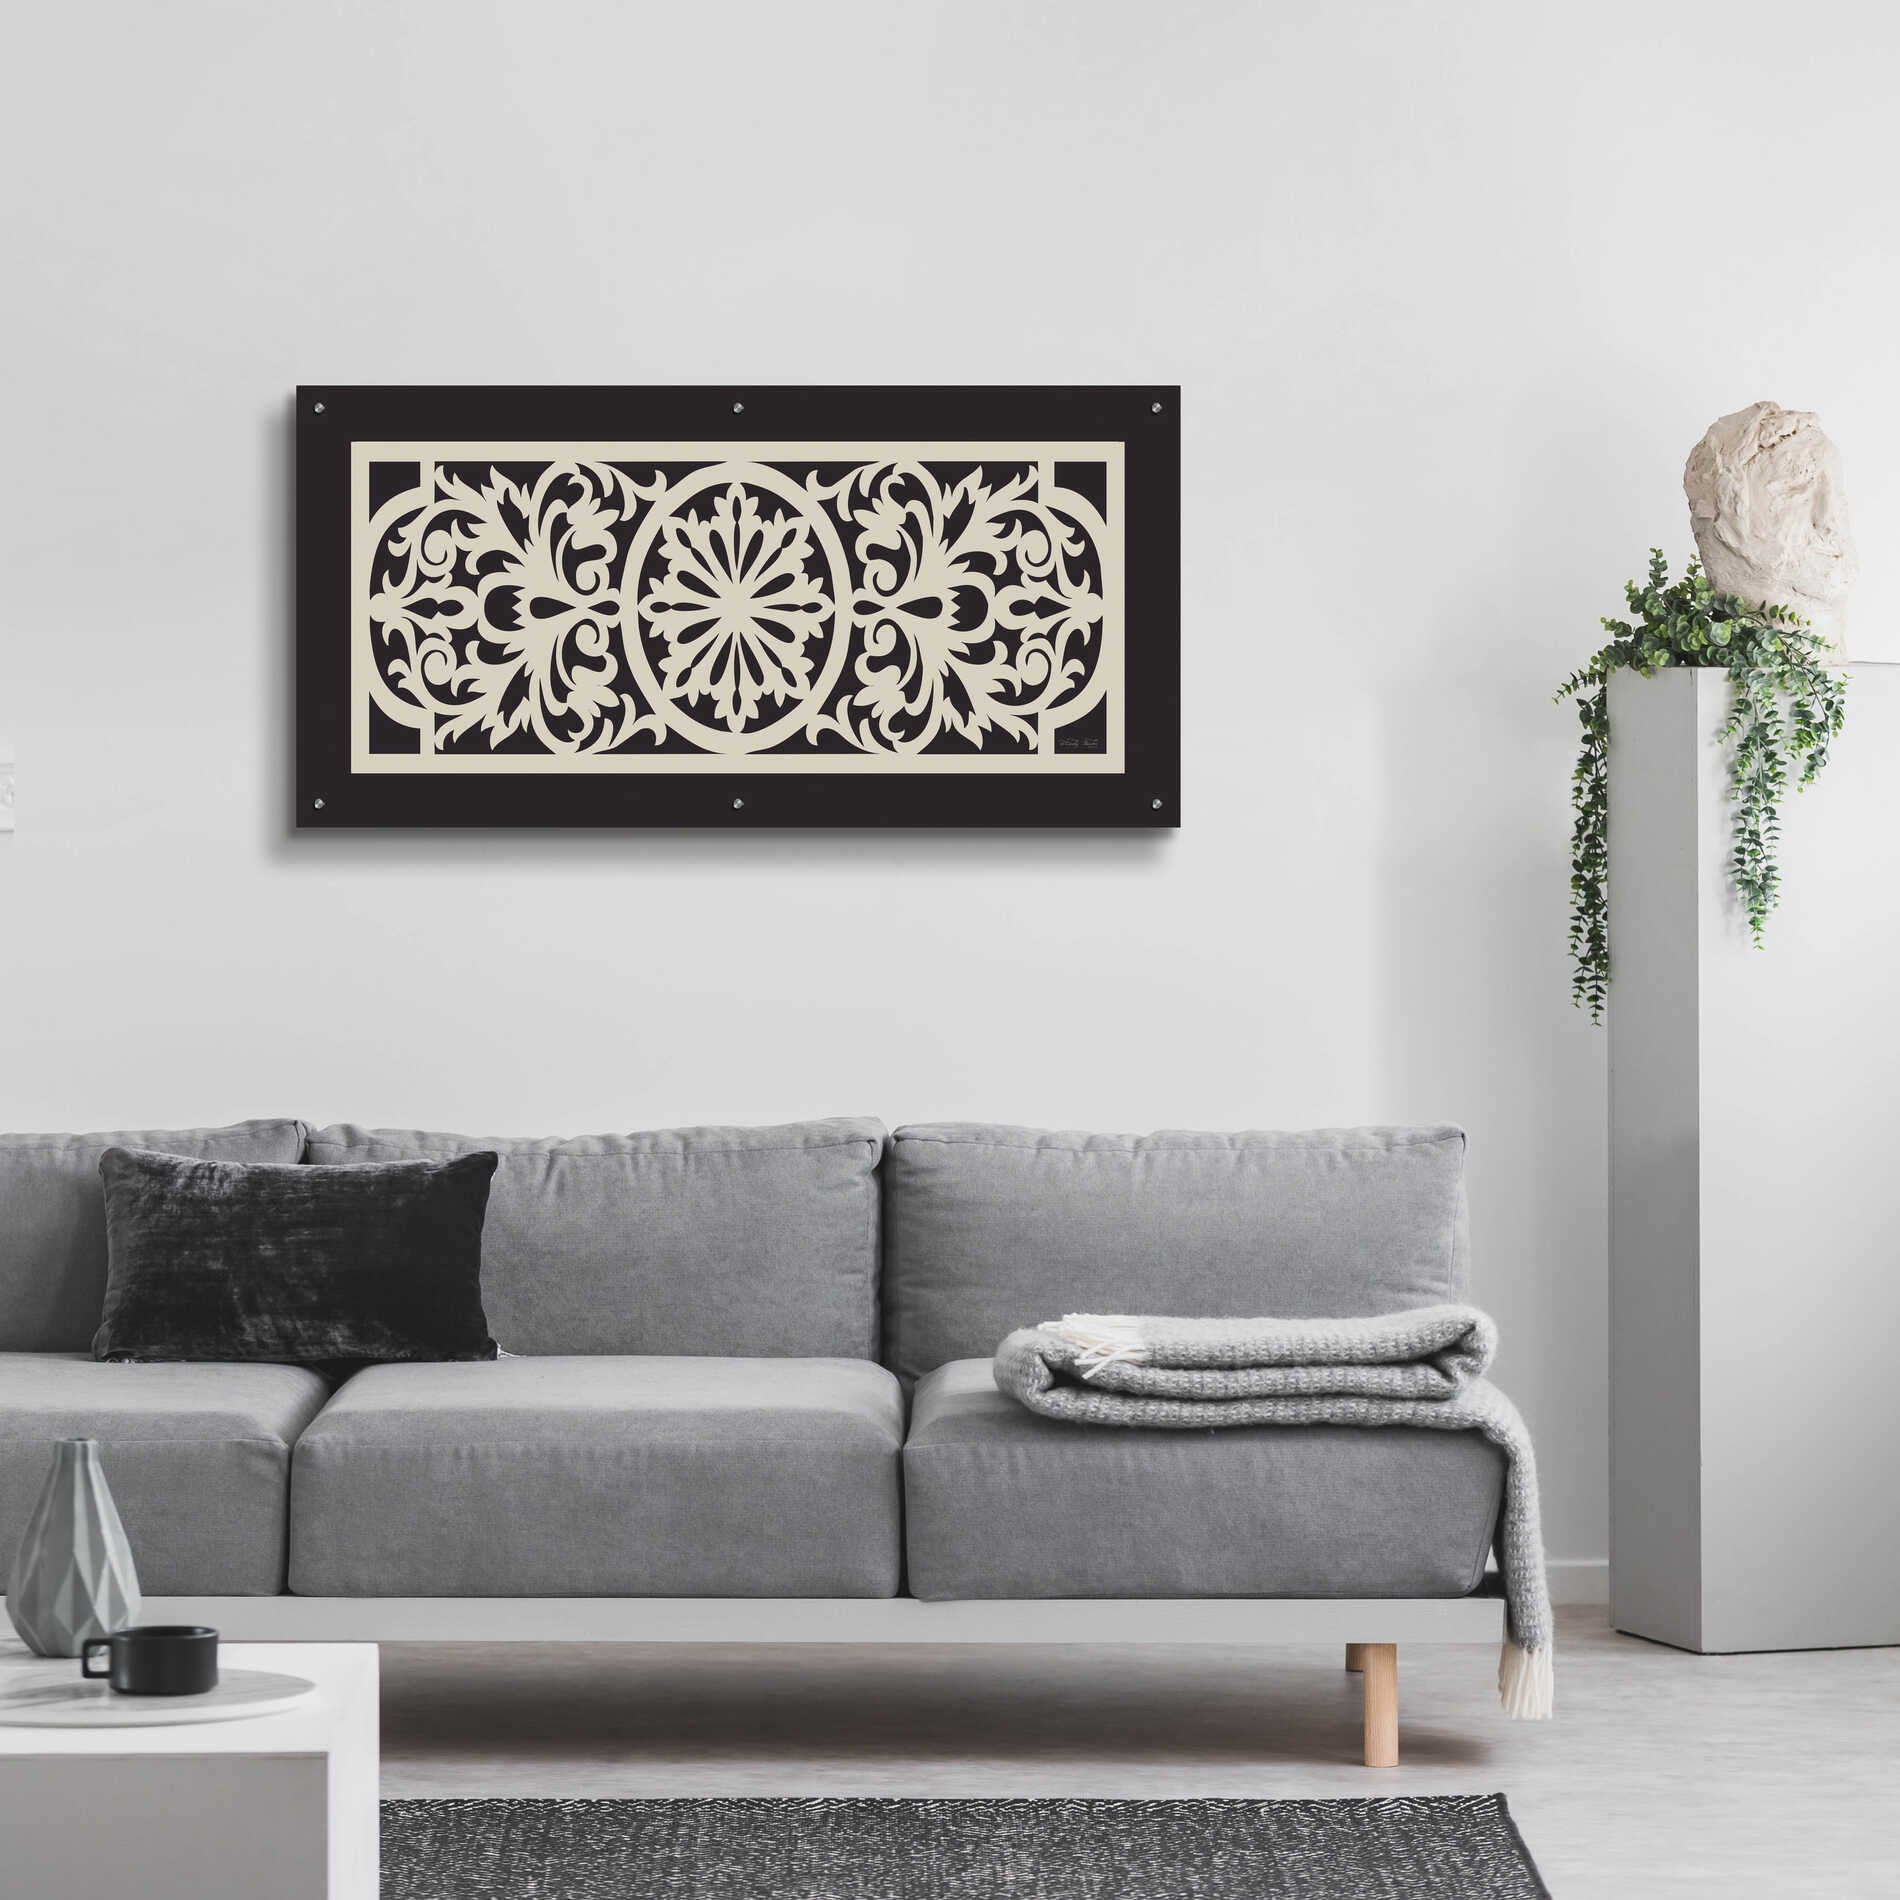 Epic Art 'Patterned Grill II' by Cindy Jacobs, Acrylic Glass Wall Art,48x24